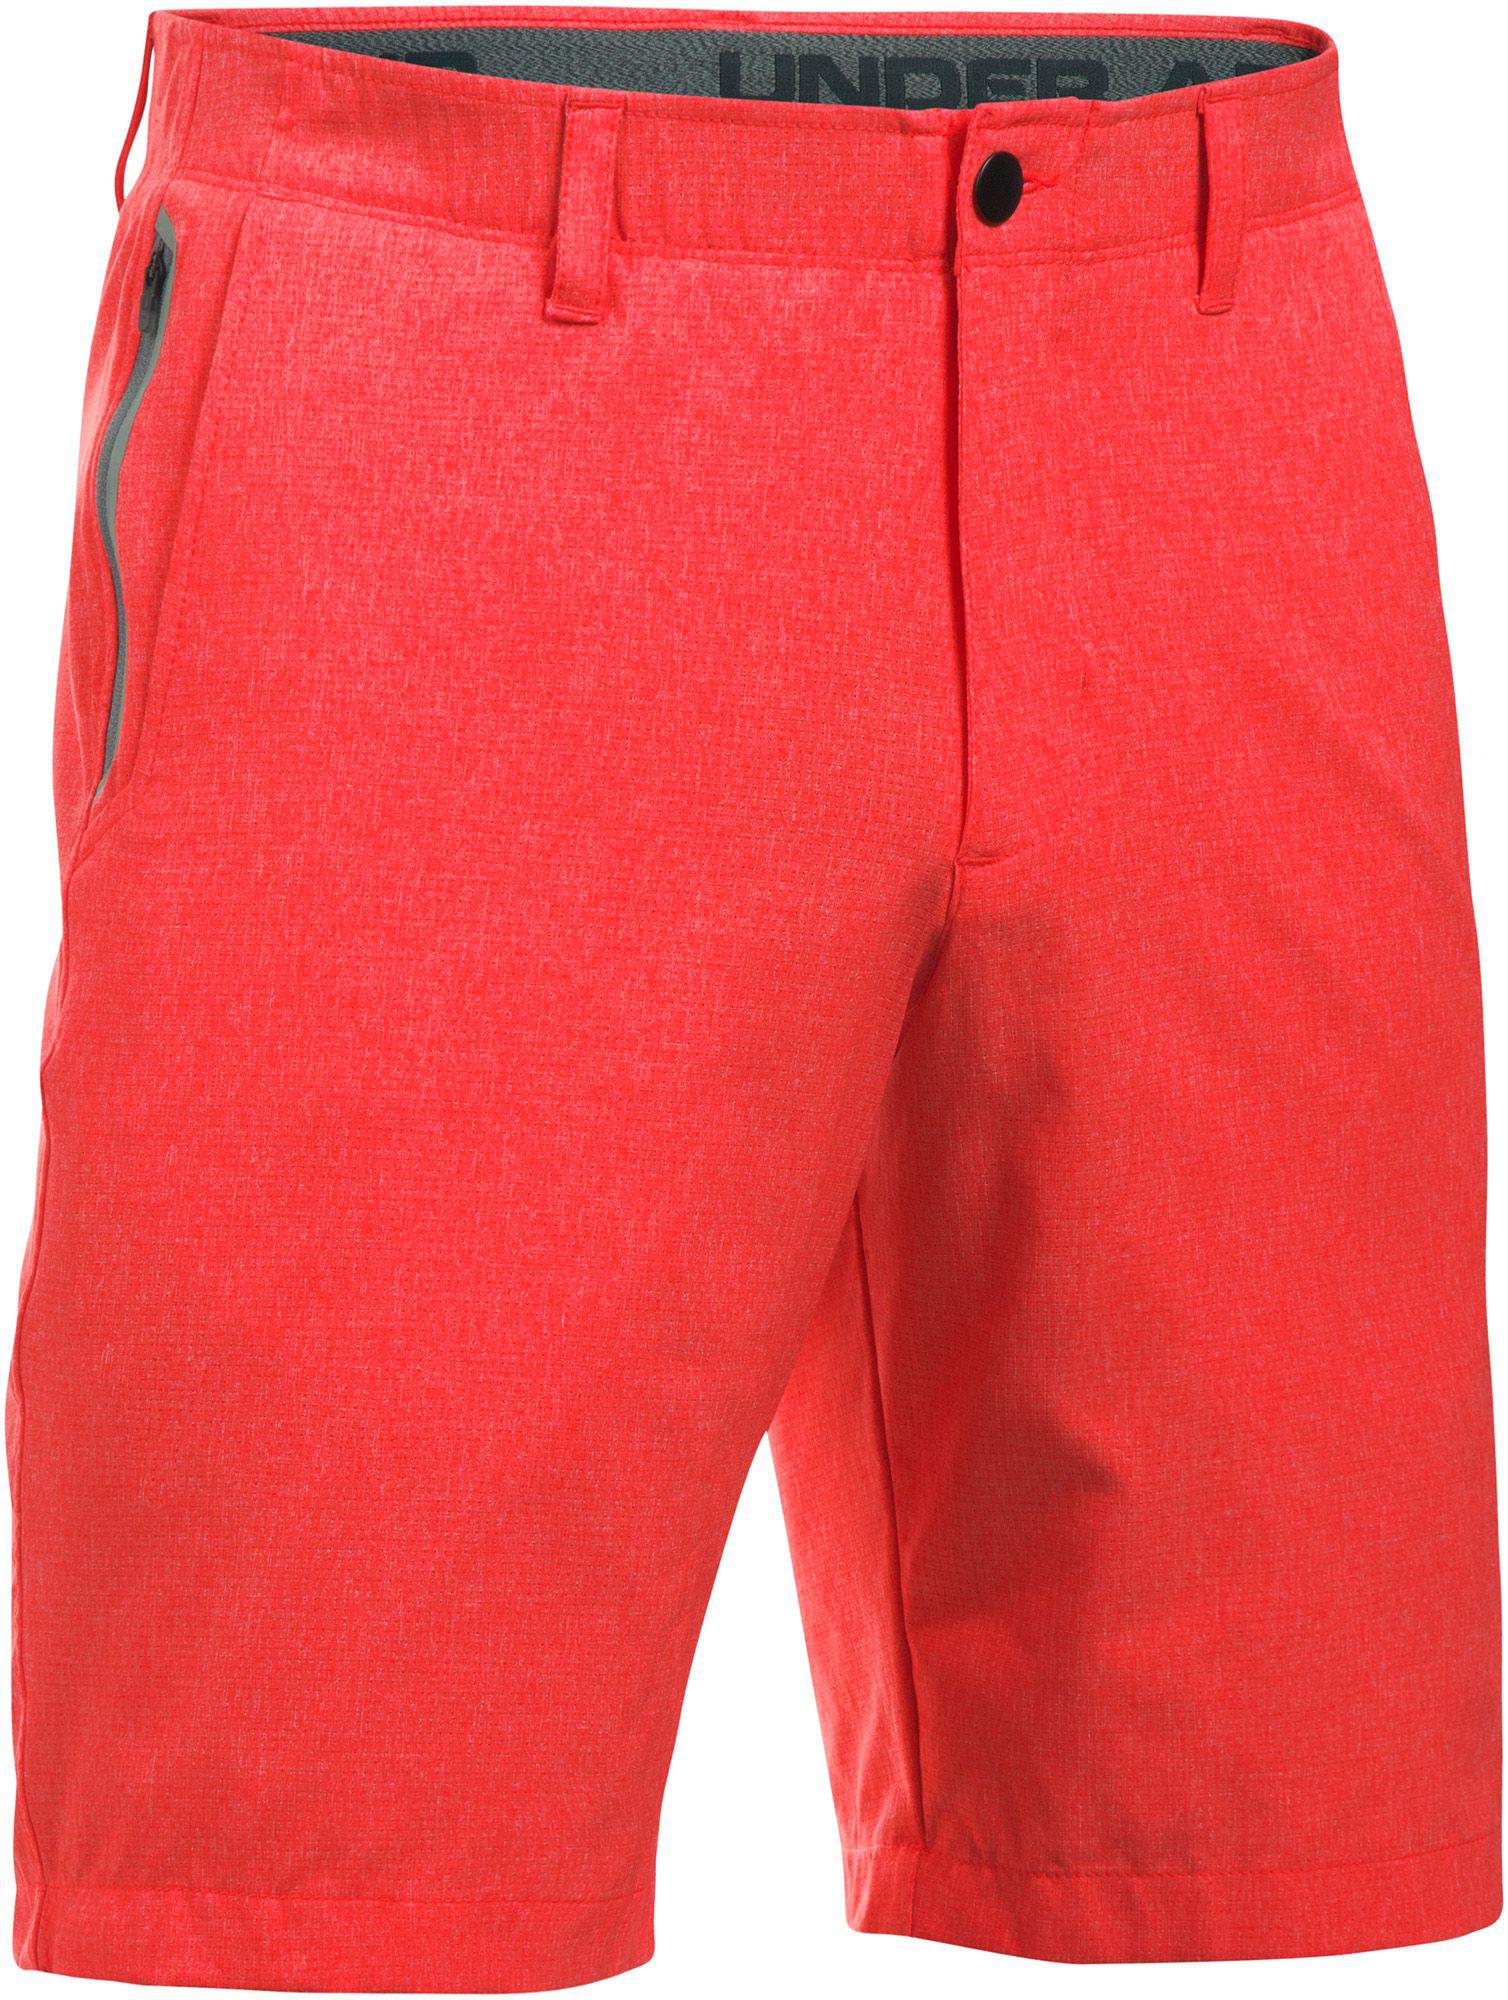 red under armour golf shorts